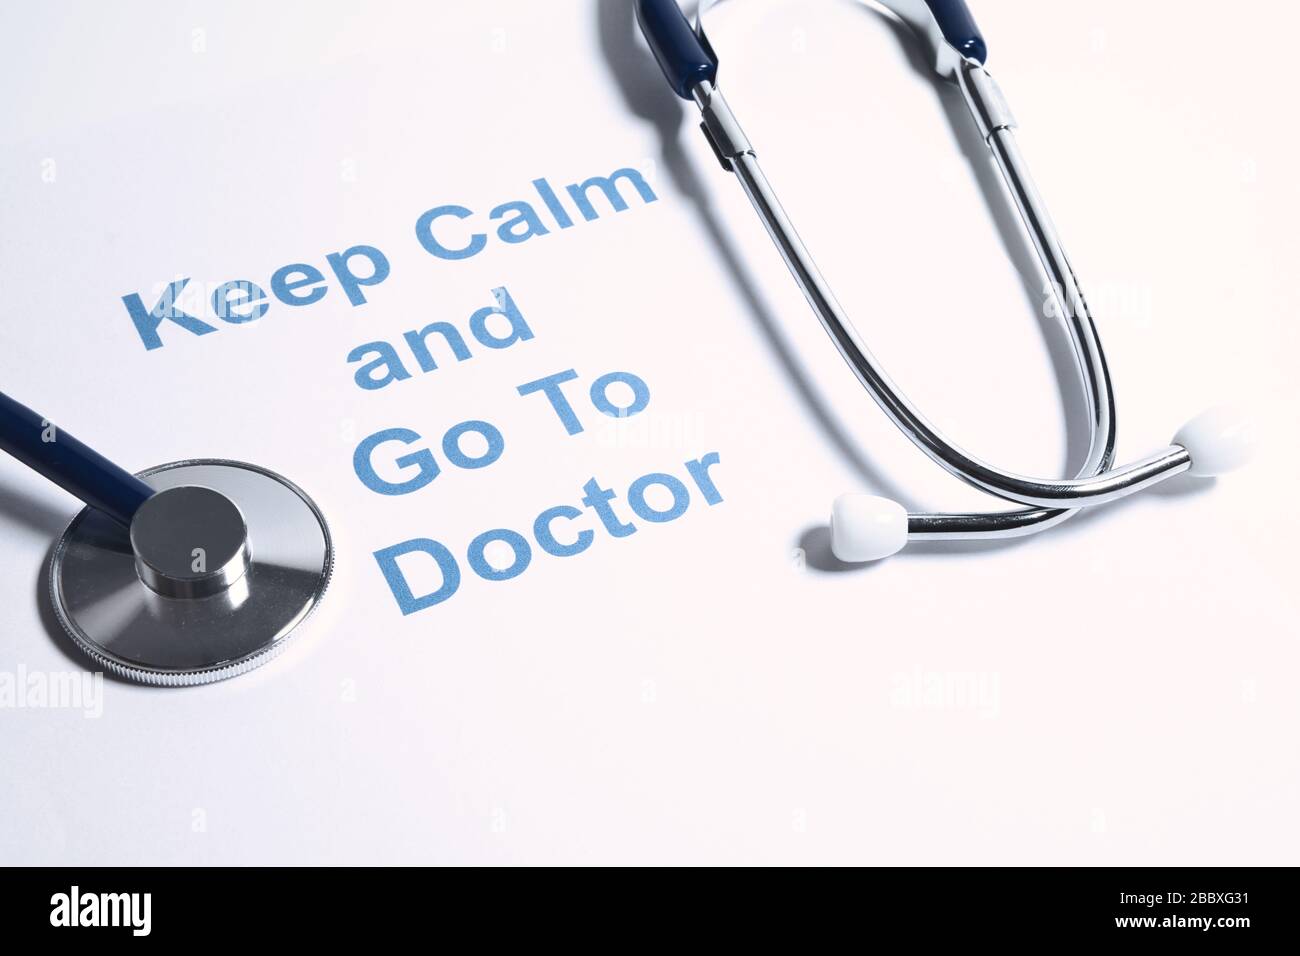 Concept idea for doctor advice, health or disease diagnosis. Keep calm and go to doctor text with stethoscope. Stock Photo